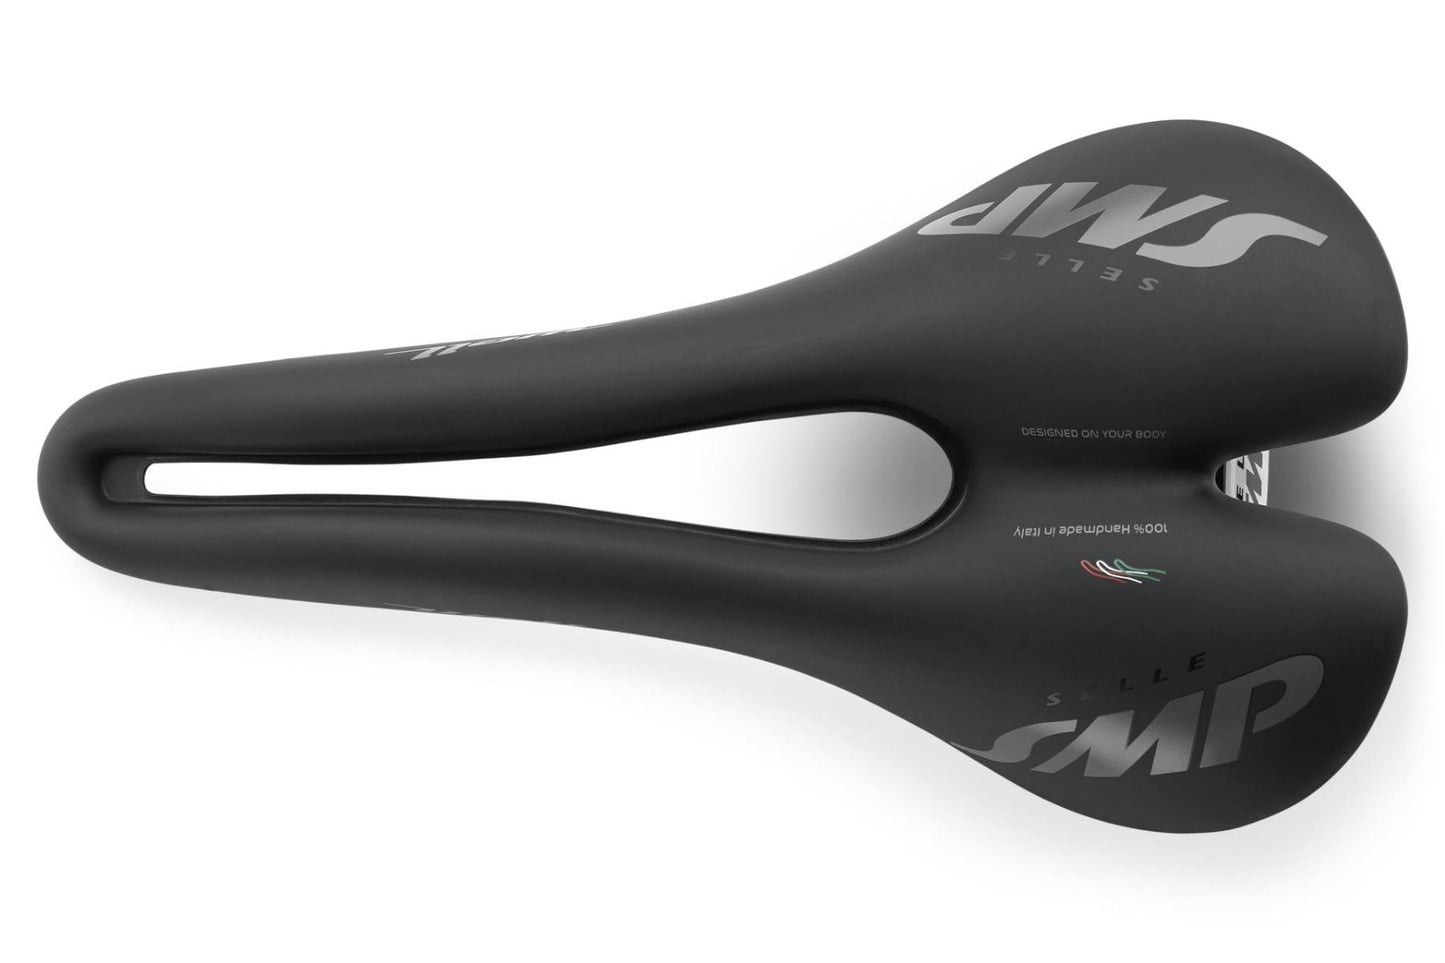 Selle SMP Well Saddle with Carbon Rails (Black)